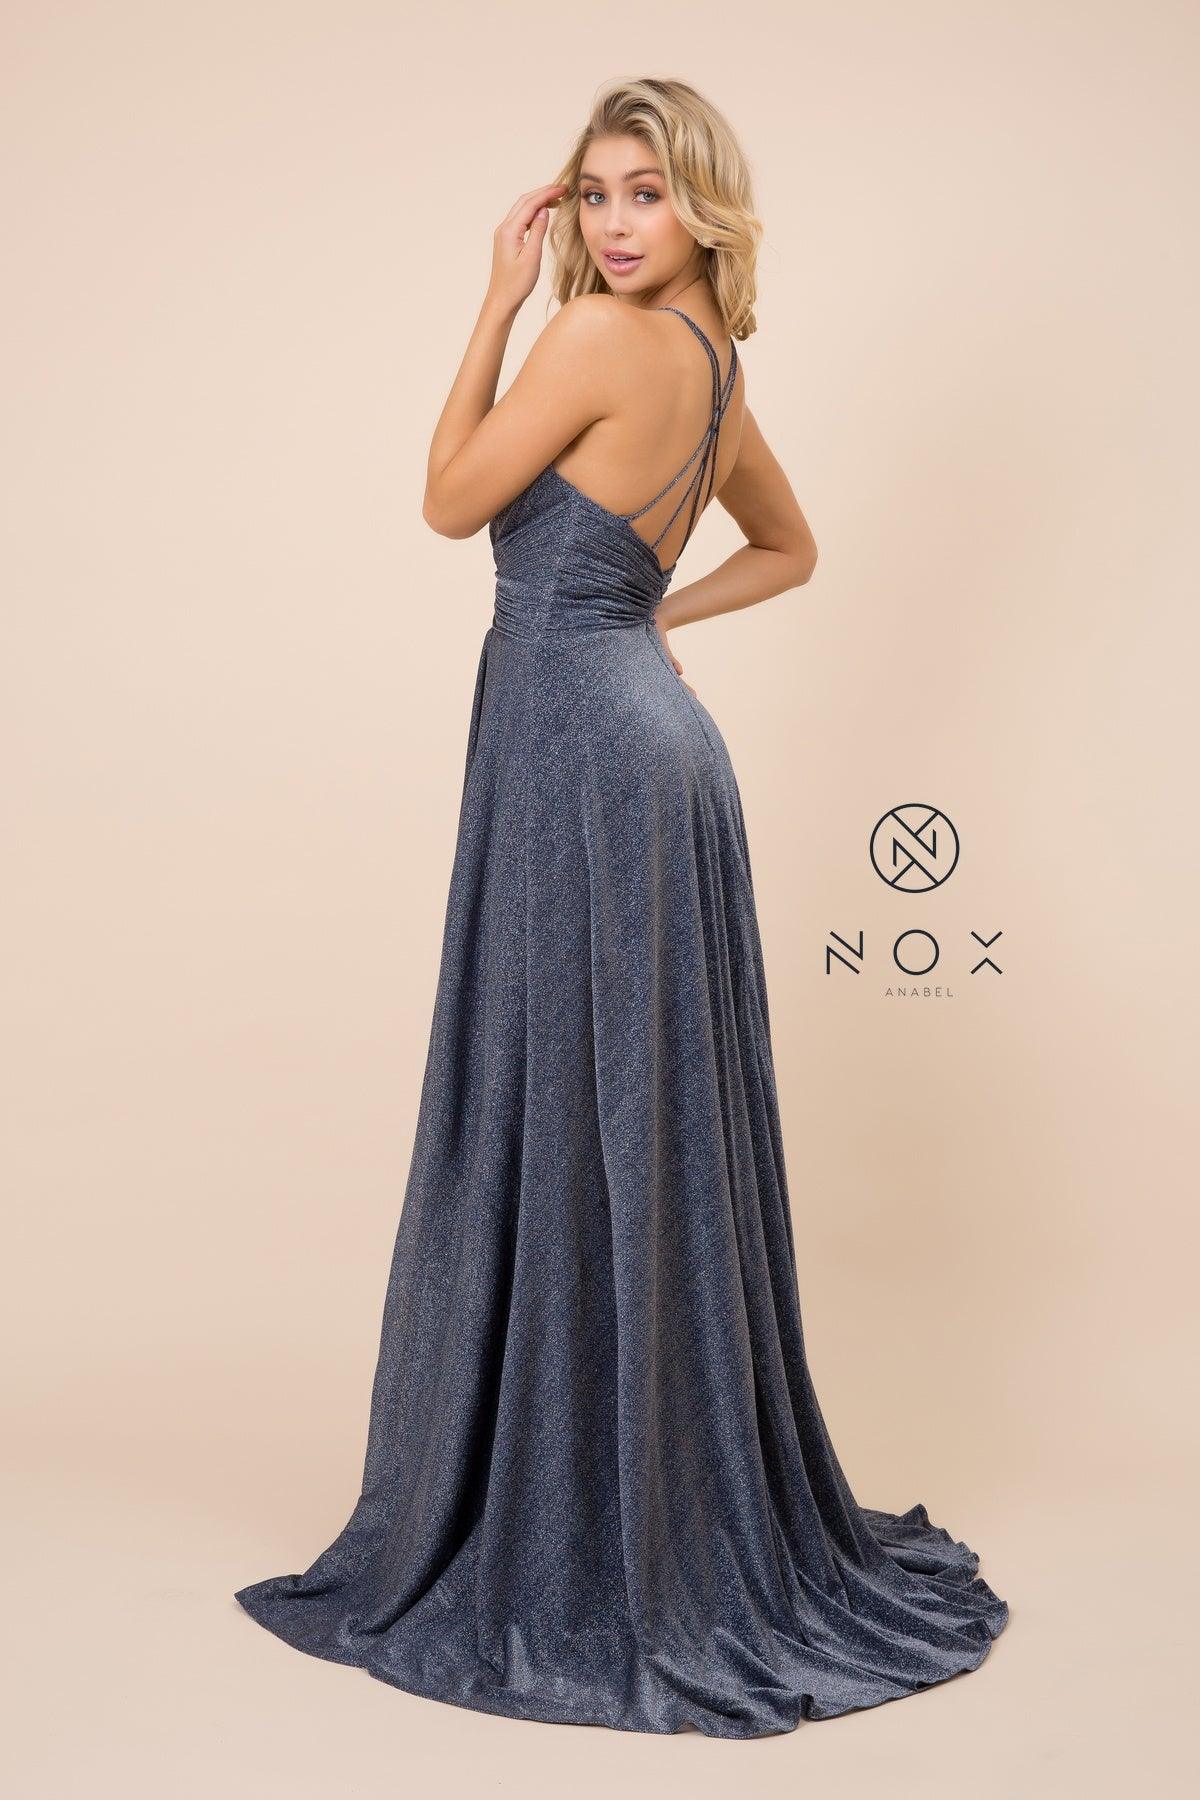 Long Metallic Prom Dress Formal Evening Gown - The Dress Outlet Nox Anabel